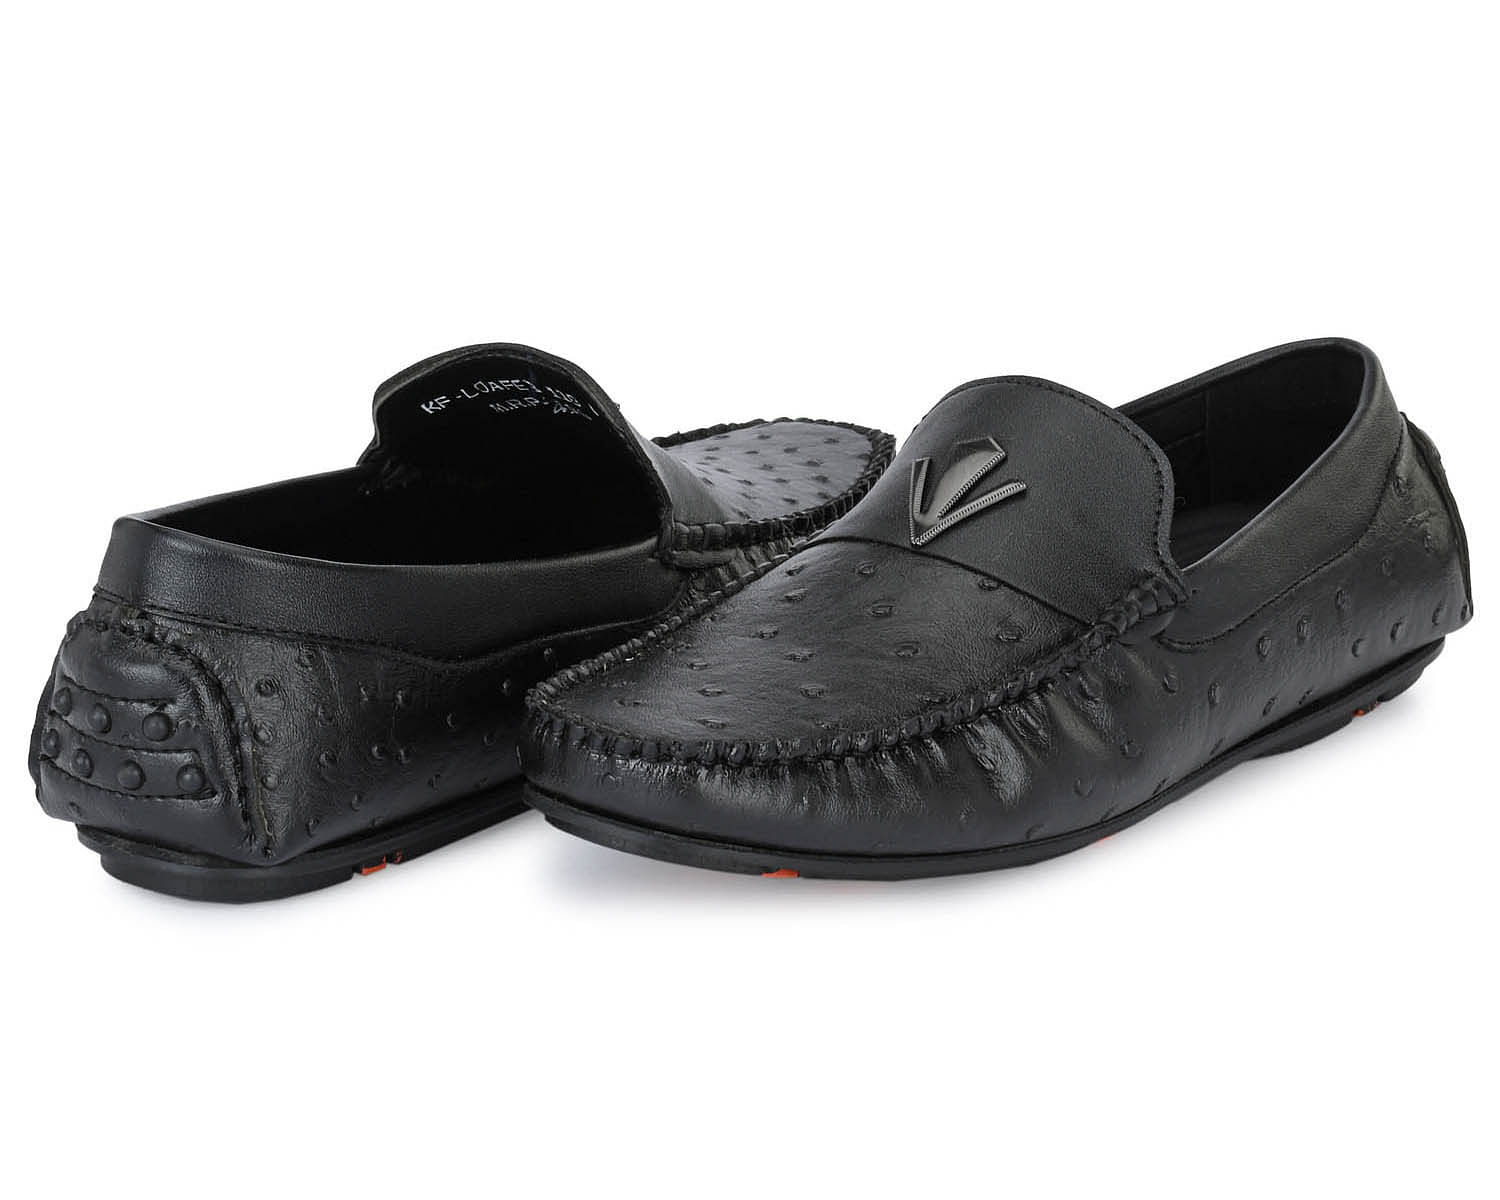 Pair-it Men's Loafers Shoes - KF-Loafer 118 - Black